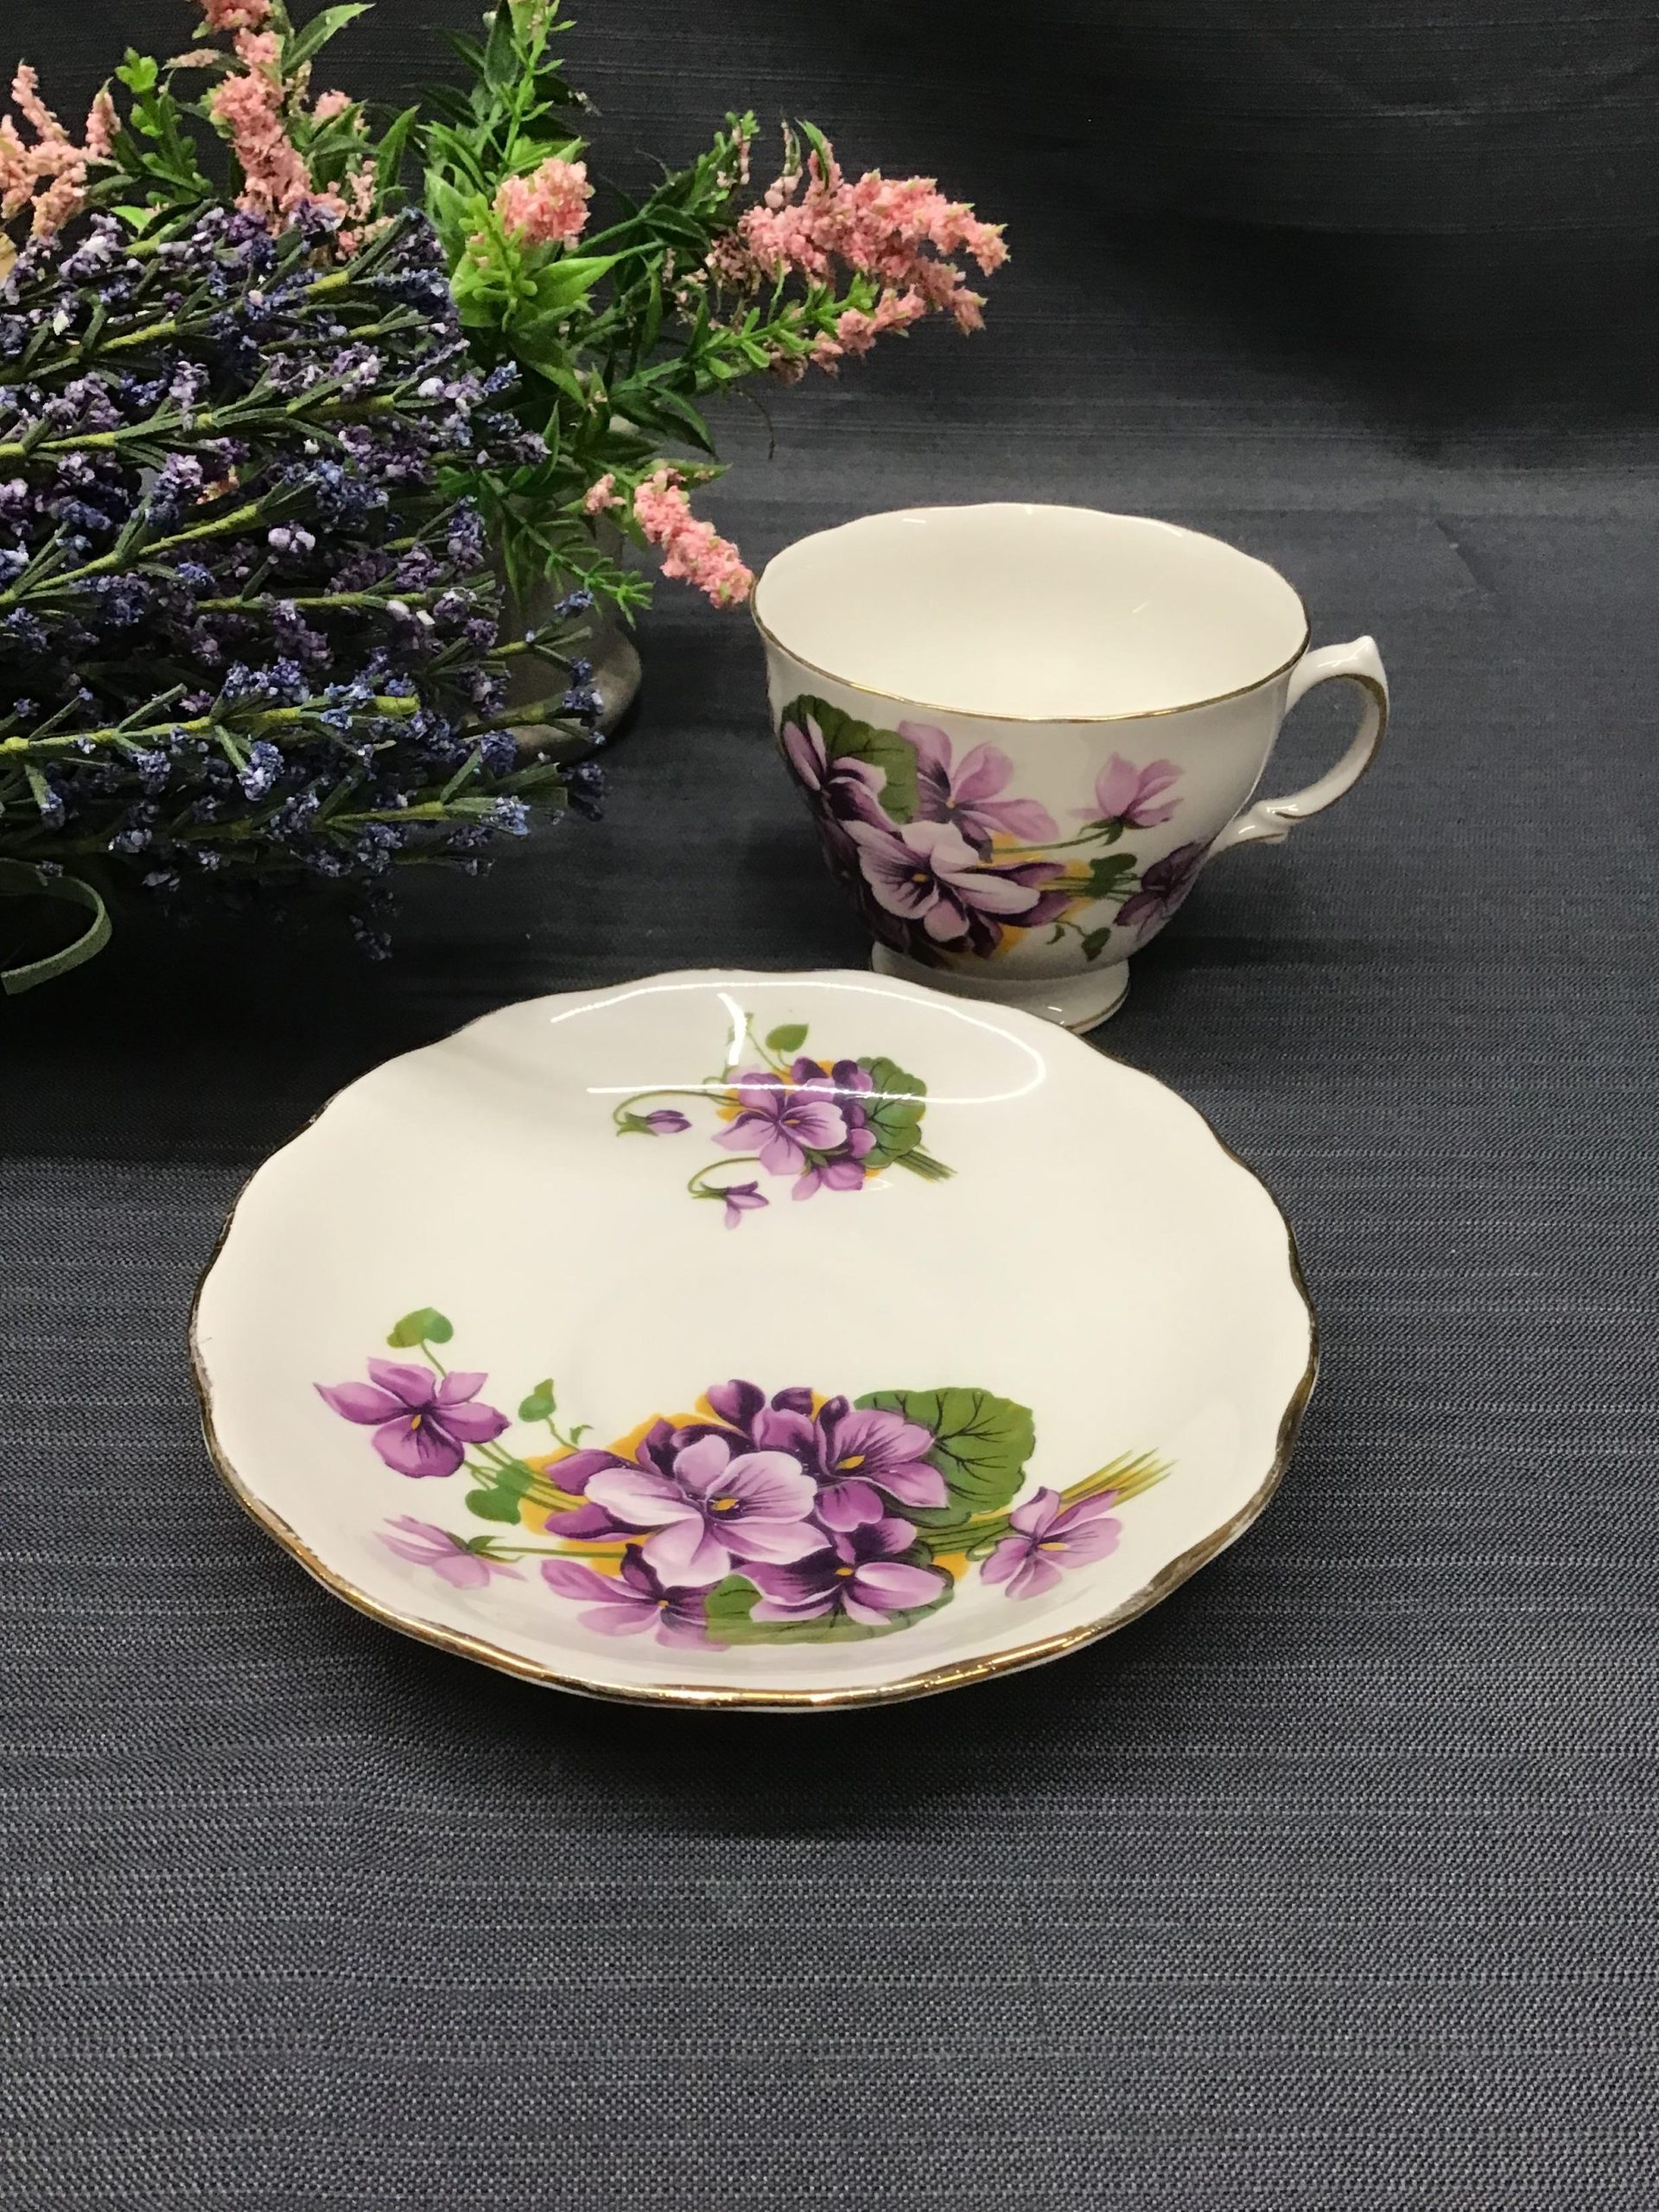 ROYAL VALE Cup & Saucer “Painted Tongue” Flower